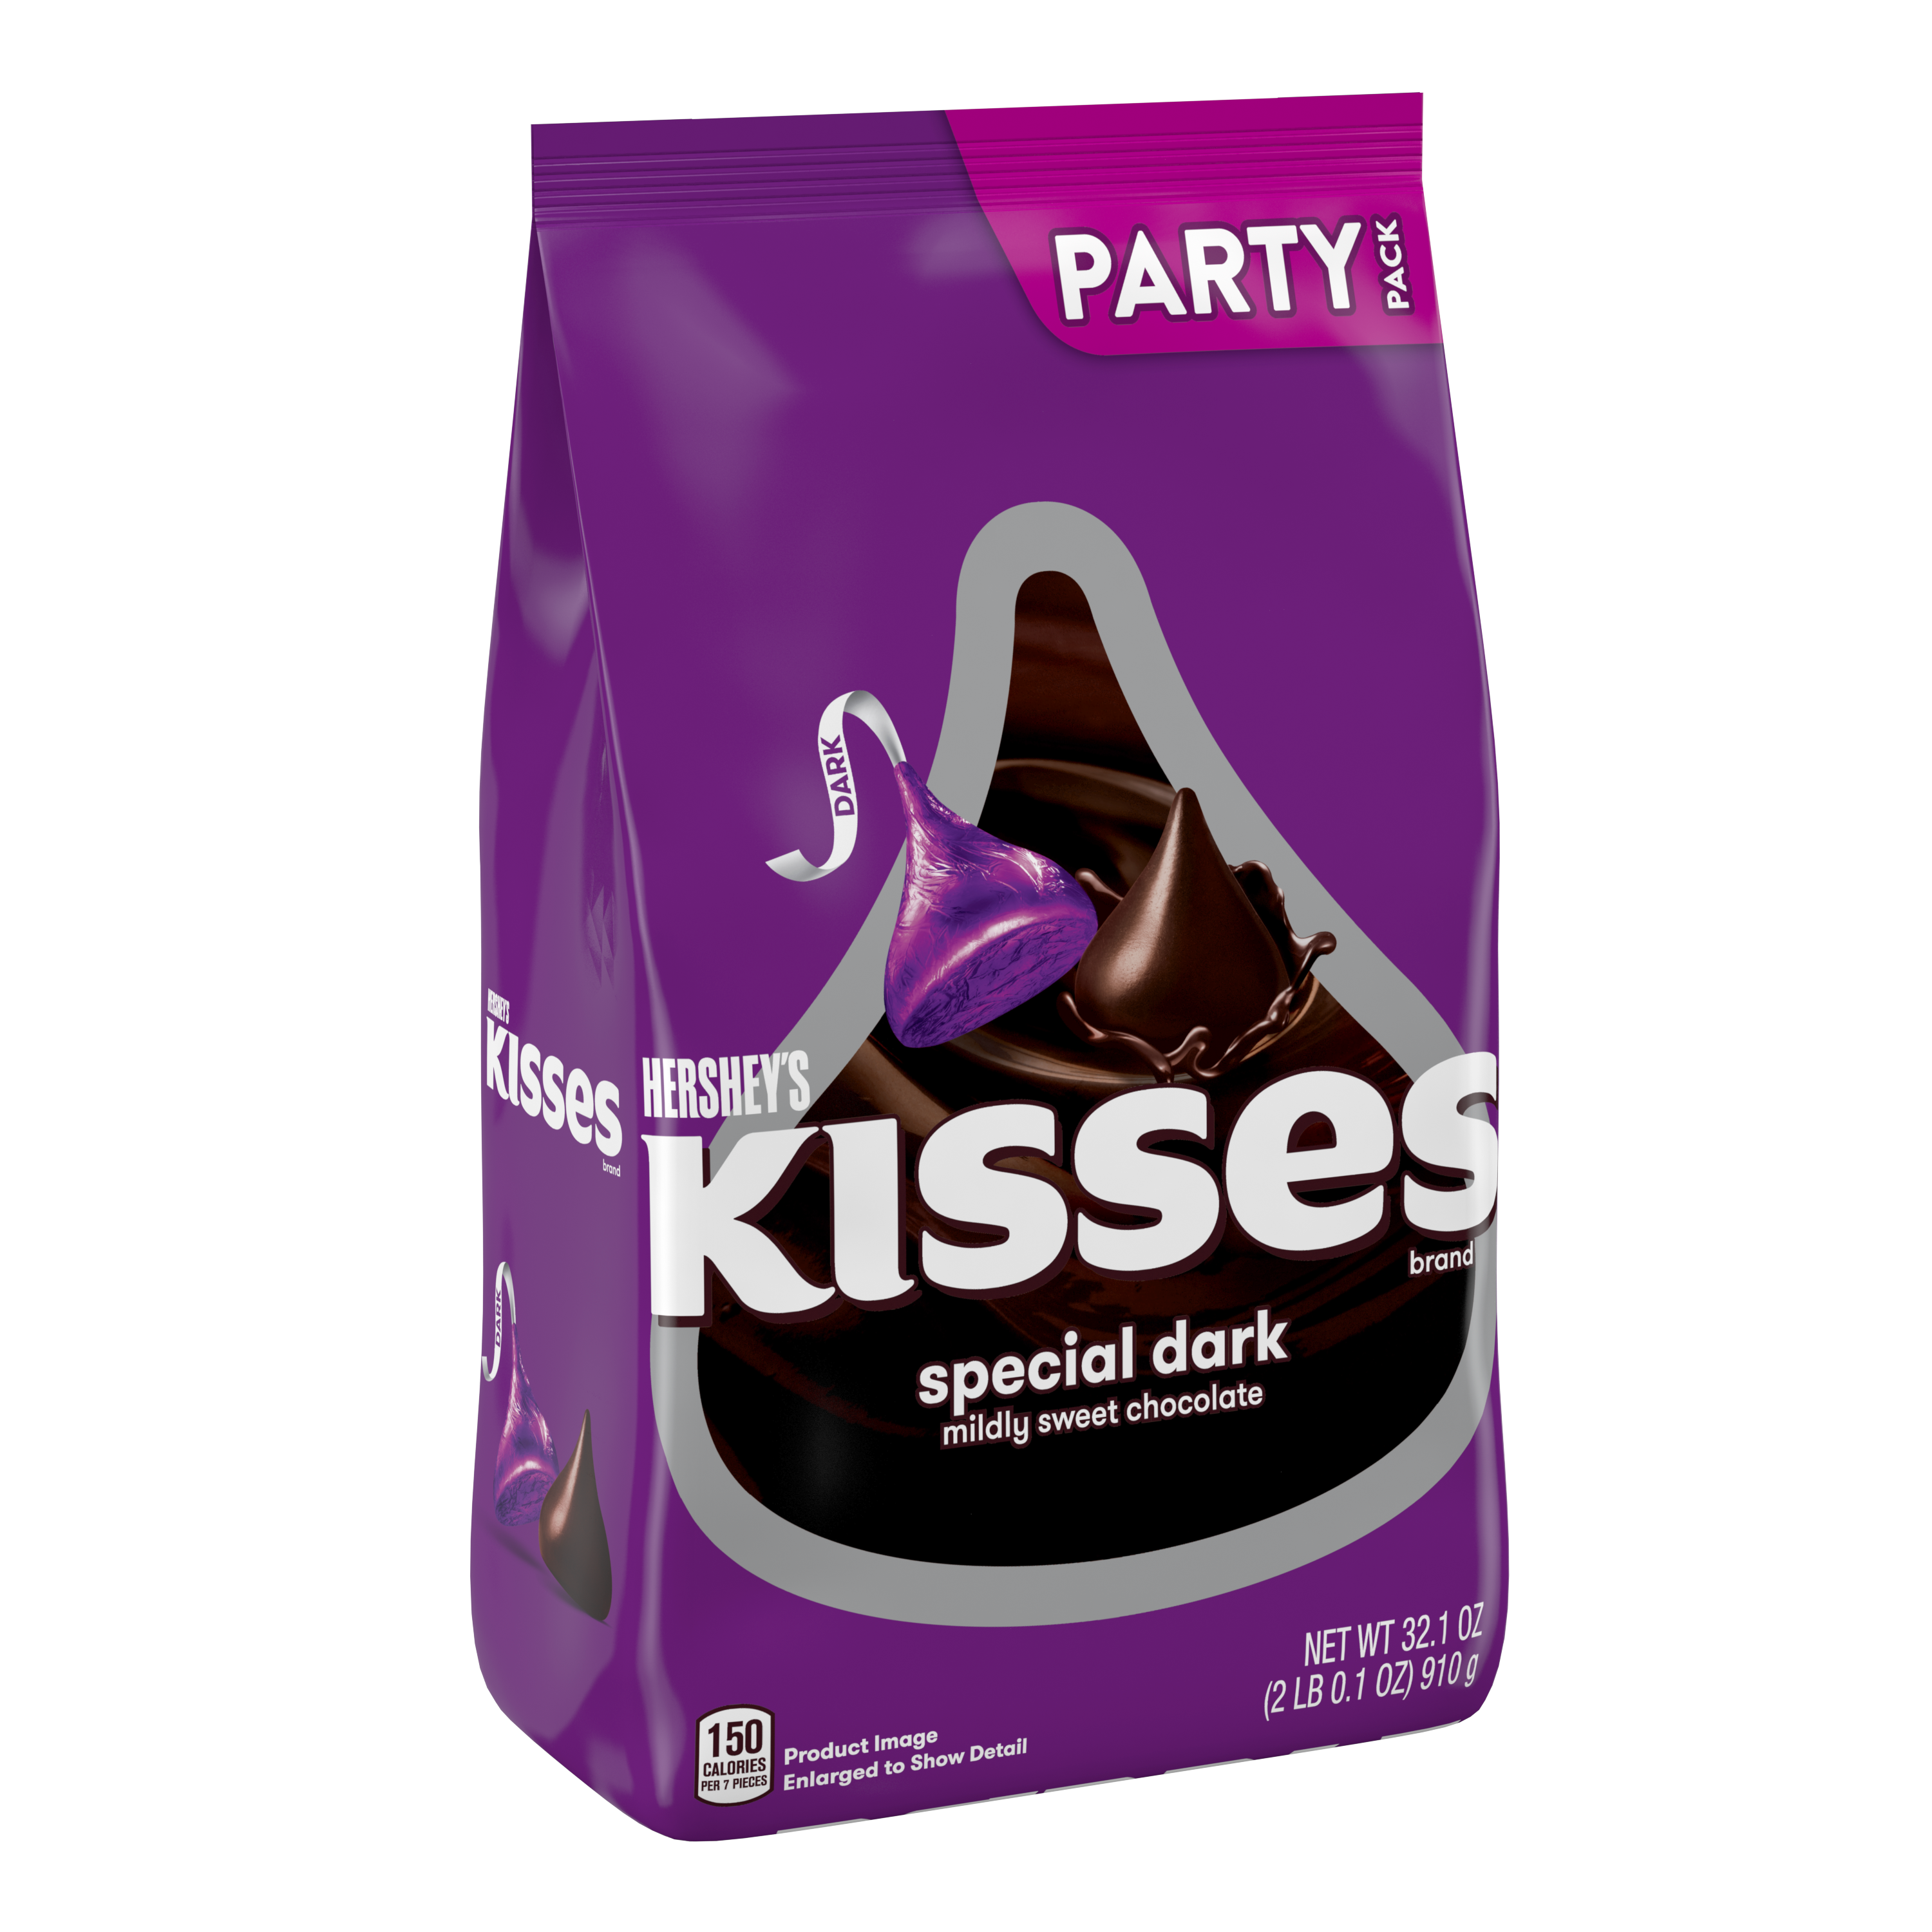 HERSHEY'S KISSES SPECIAL DARK Mildly Sweet Chocolate Candy, 32.1 oz pack - Left Side of Package